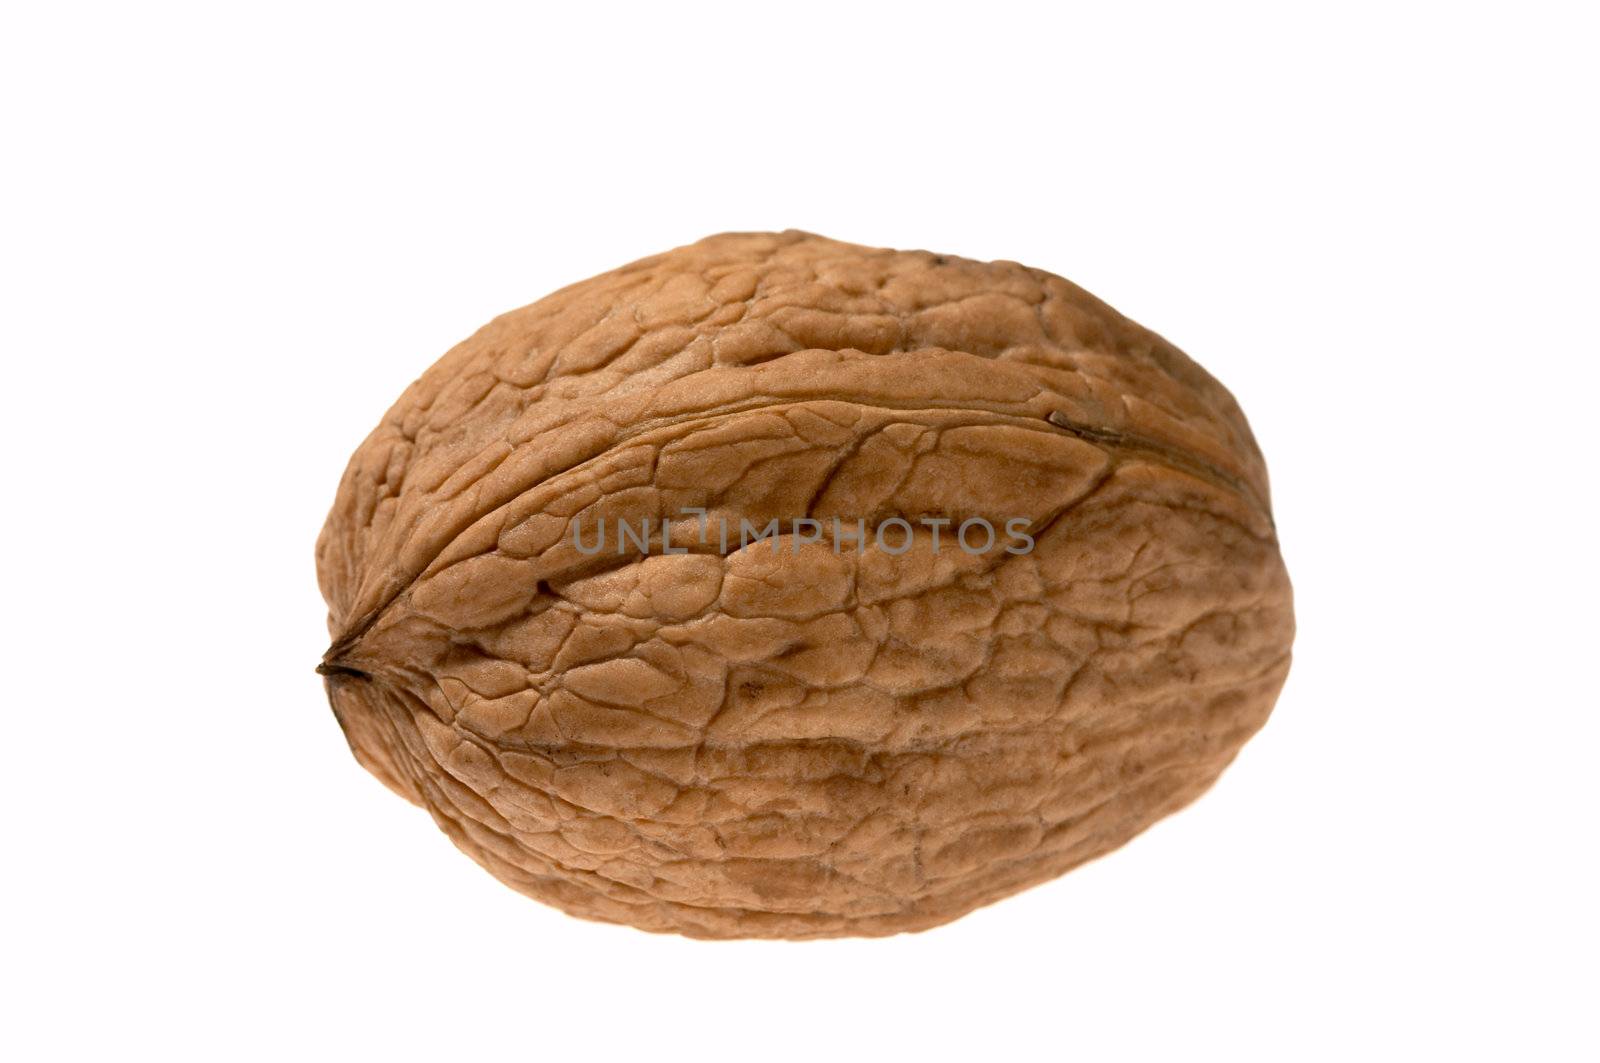 Walnut that lies horisontally isolated on the white background